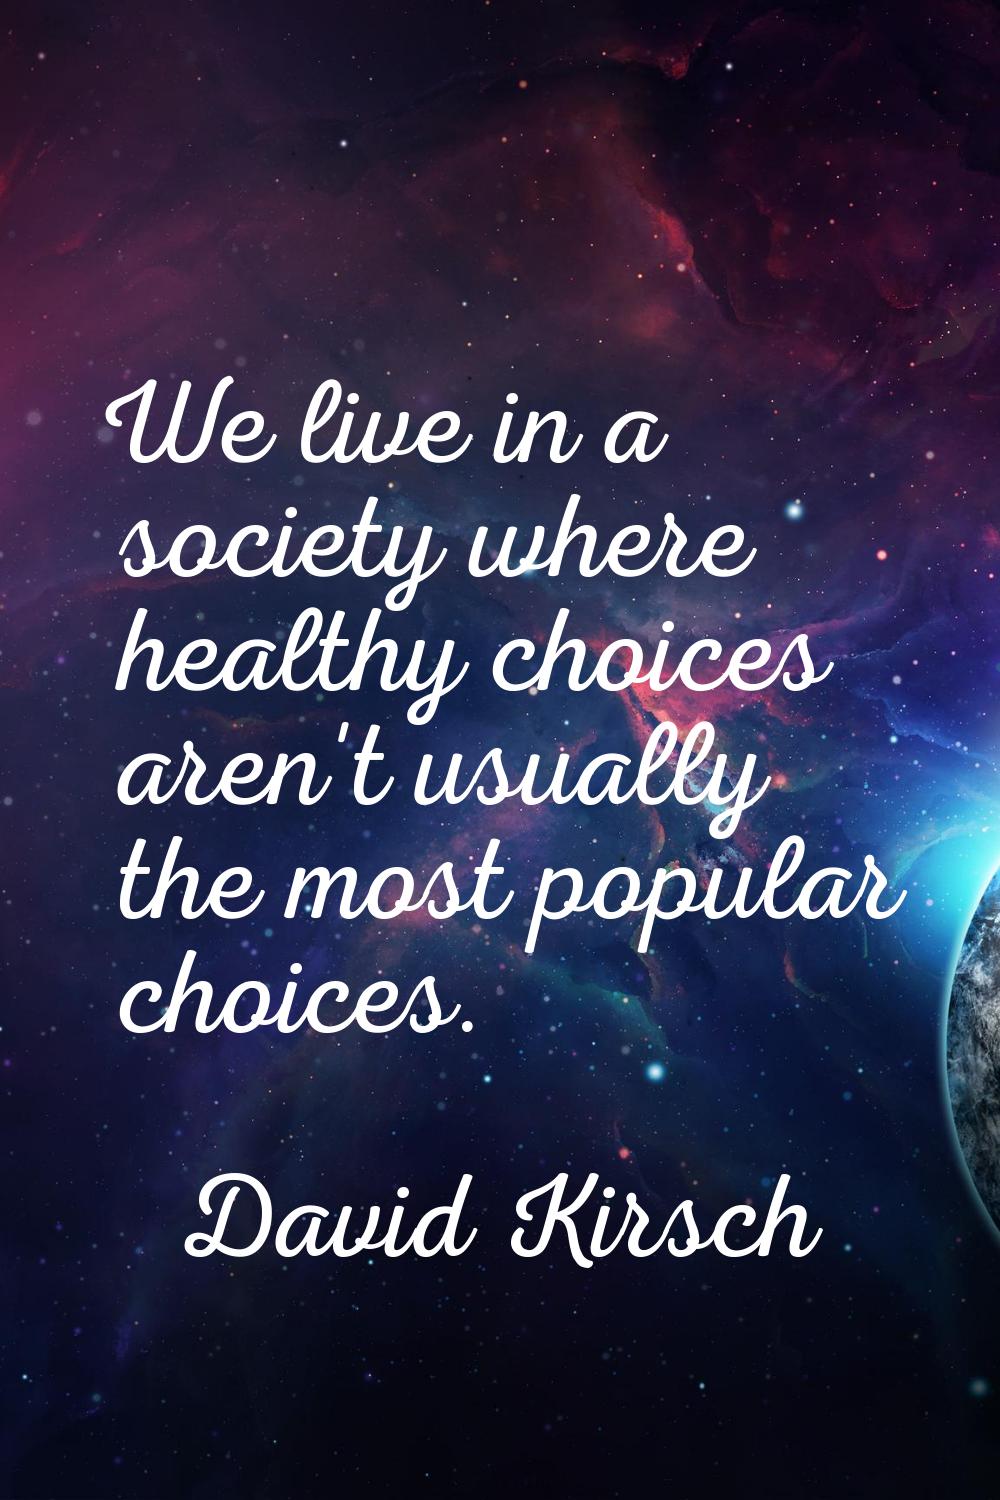 We live in a society where healthy choices aren't usually the most popular choices.